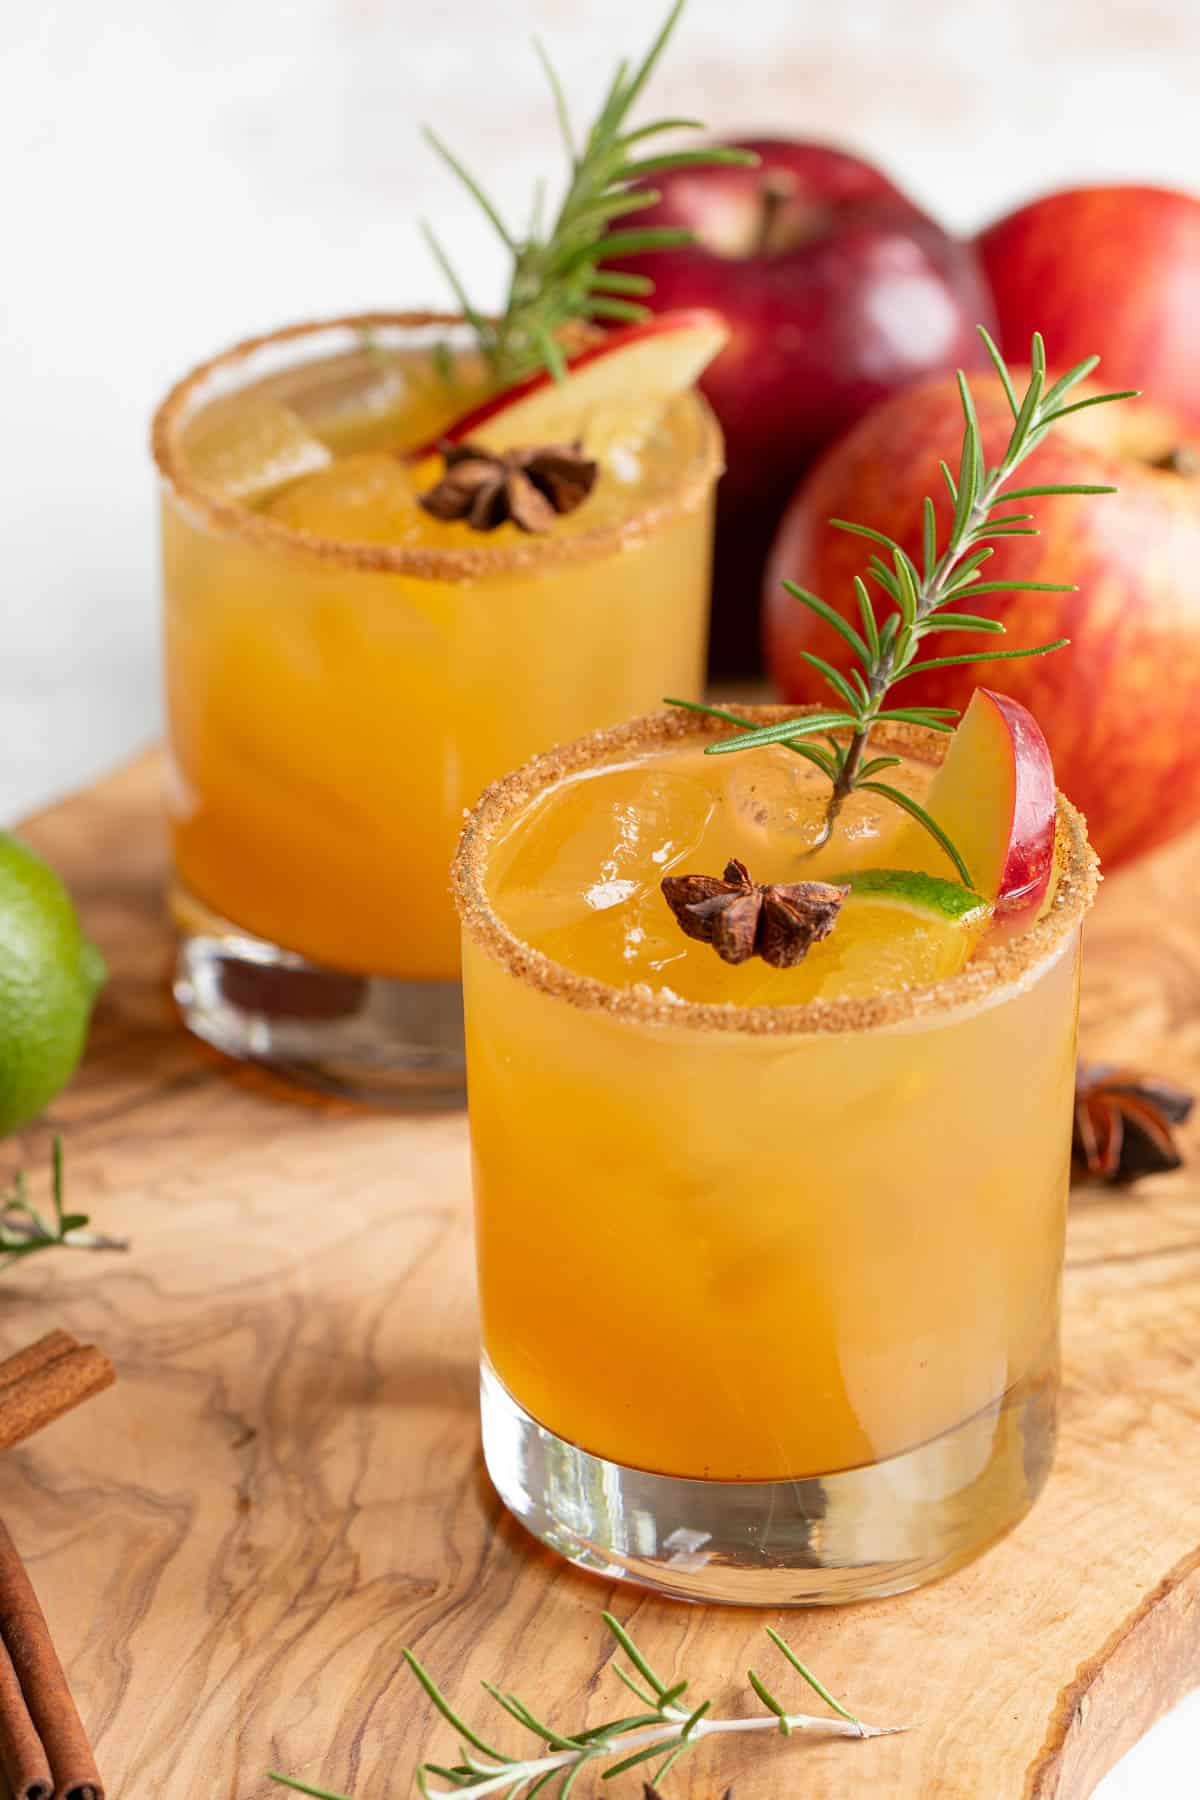 Front view of two garnished apple cider margaritas on a wood surface.